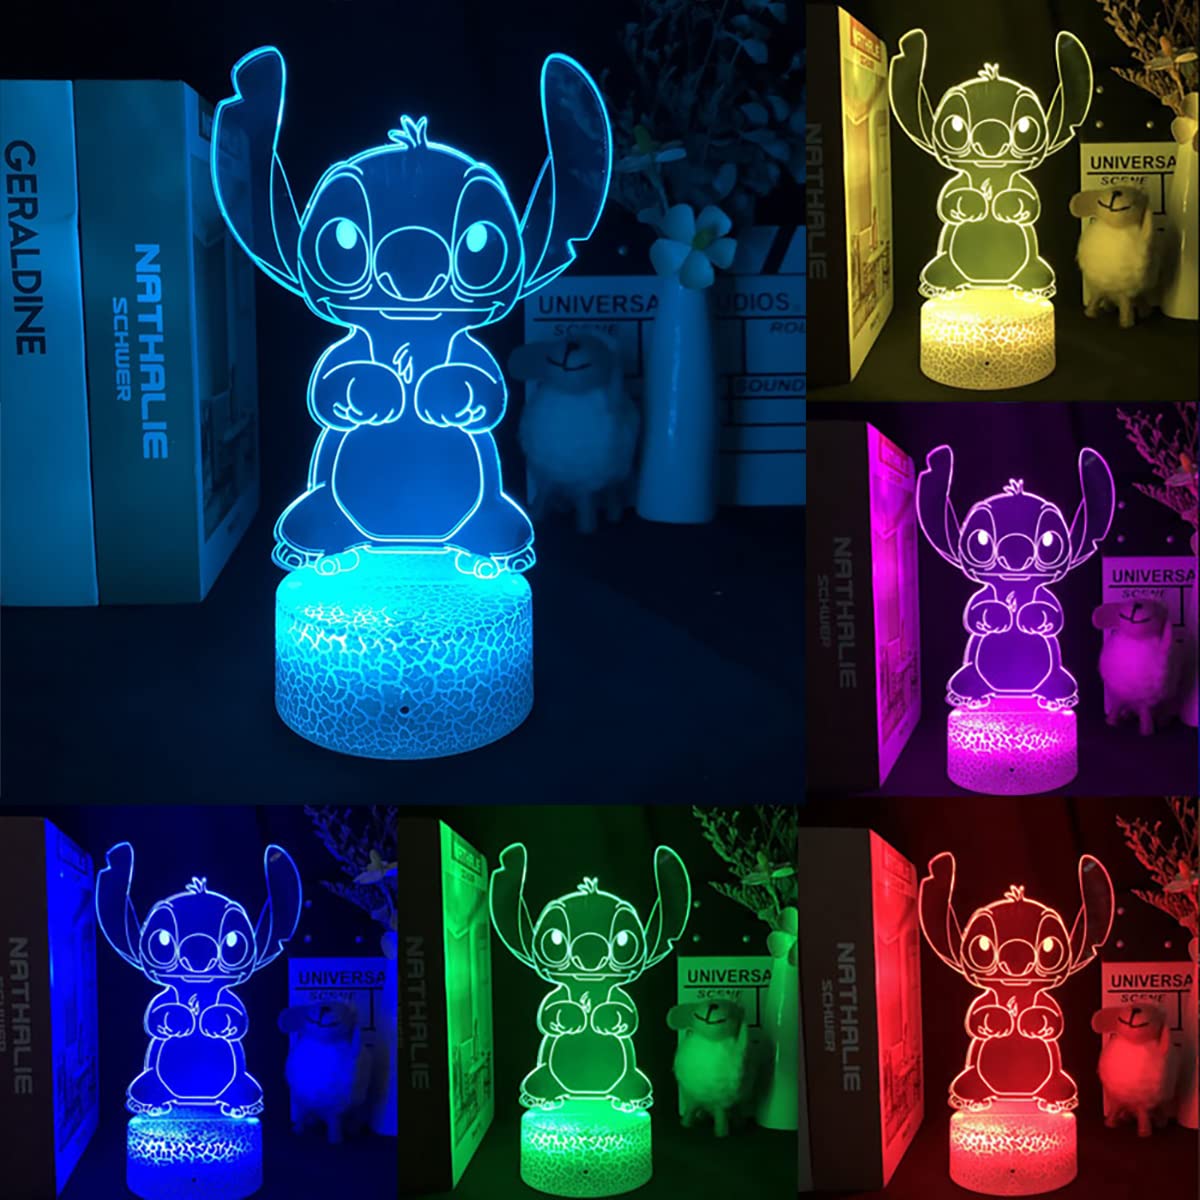 Stitch Night Light, 3D LED Stitch Toys with Smart Remote Control 16 Color  Stitch Lamp for Christmas Stitch Gift, Kids Room Decoration, Holiday Gifts